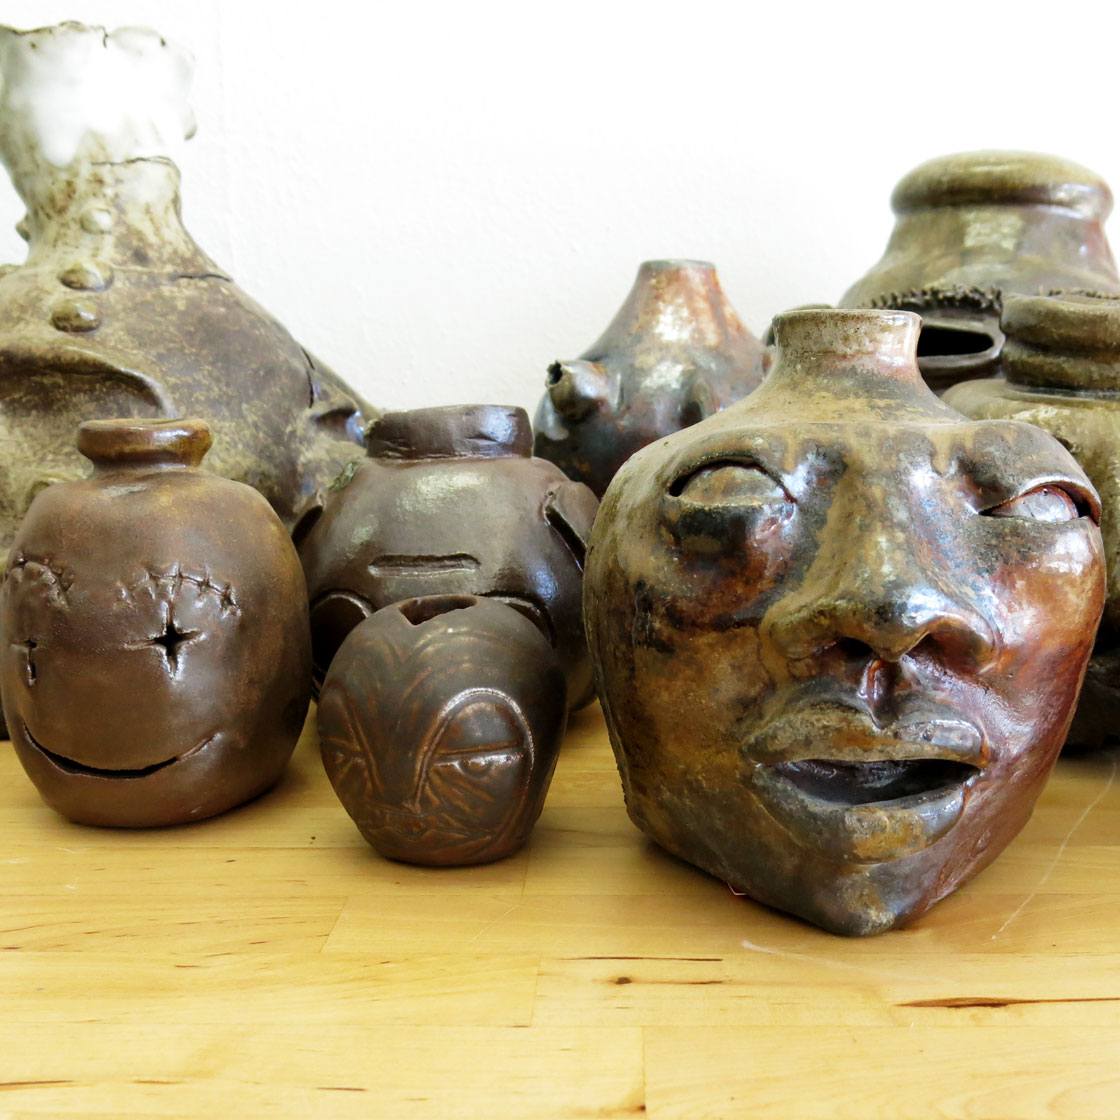 Handcrafted ceramic works in various abstract face shapes